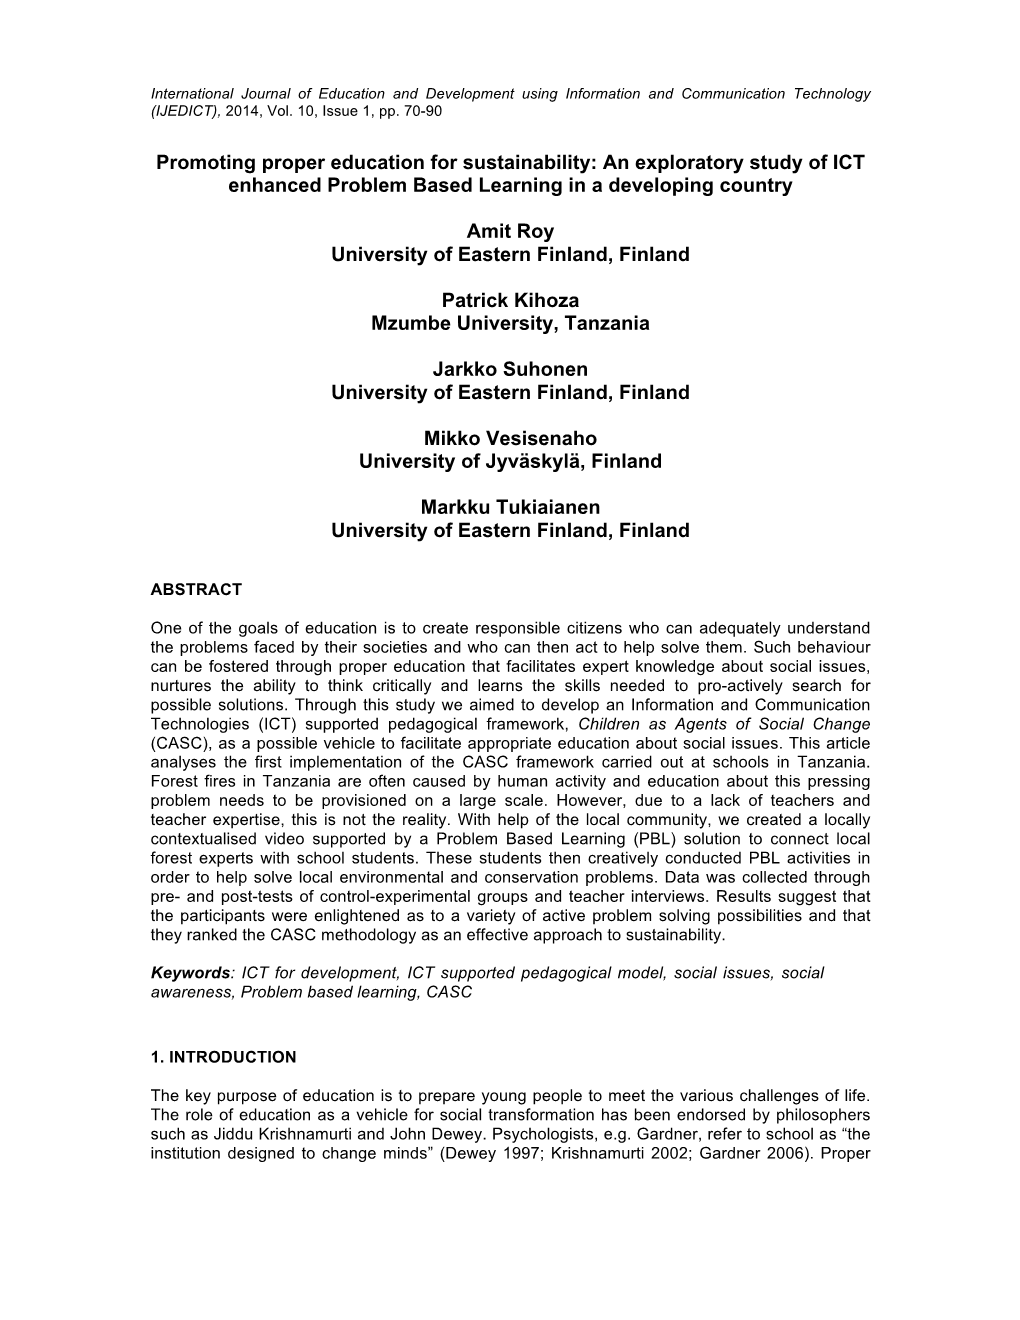 Promoting Proper Education for Sustainability: an Exploratory Study of ICT Enhanced Problem Based Learning in a Developing Country